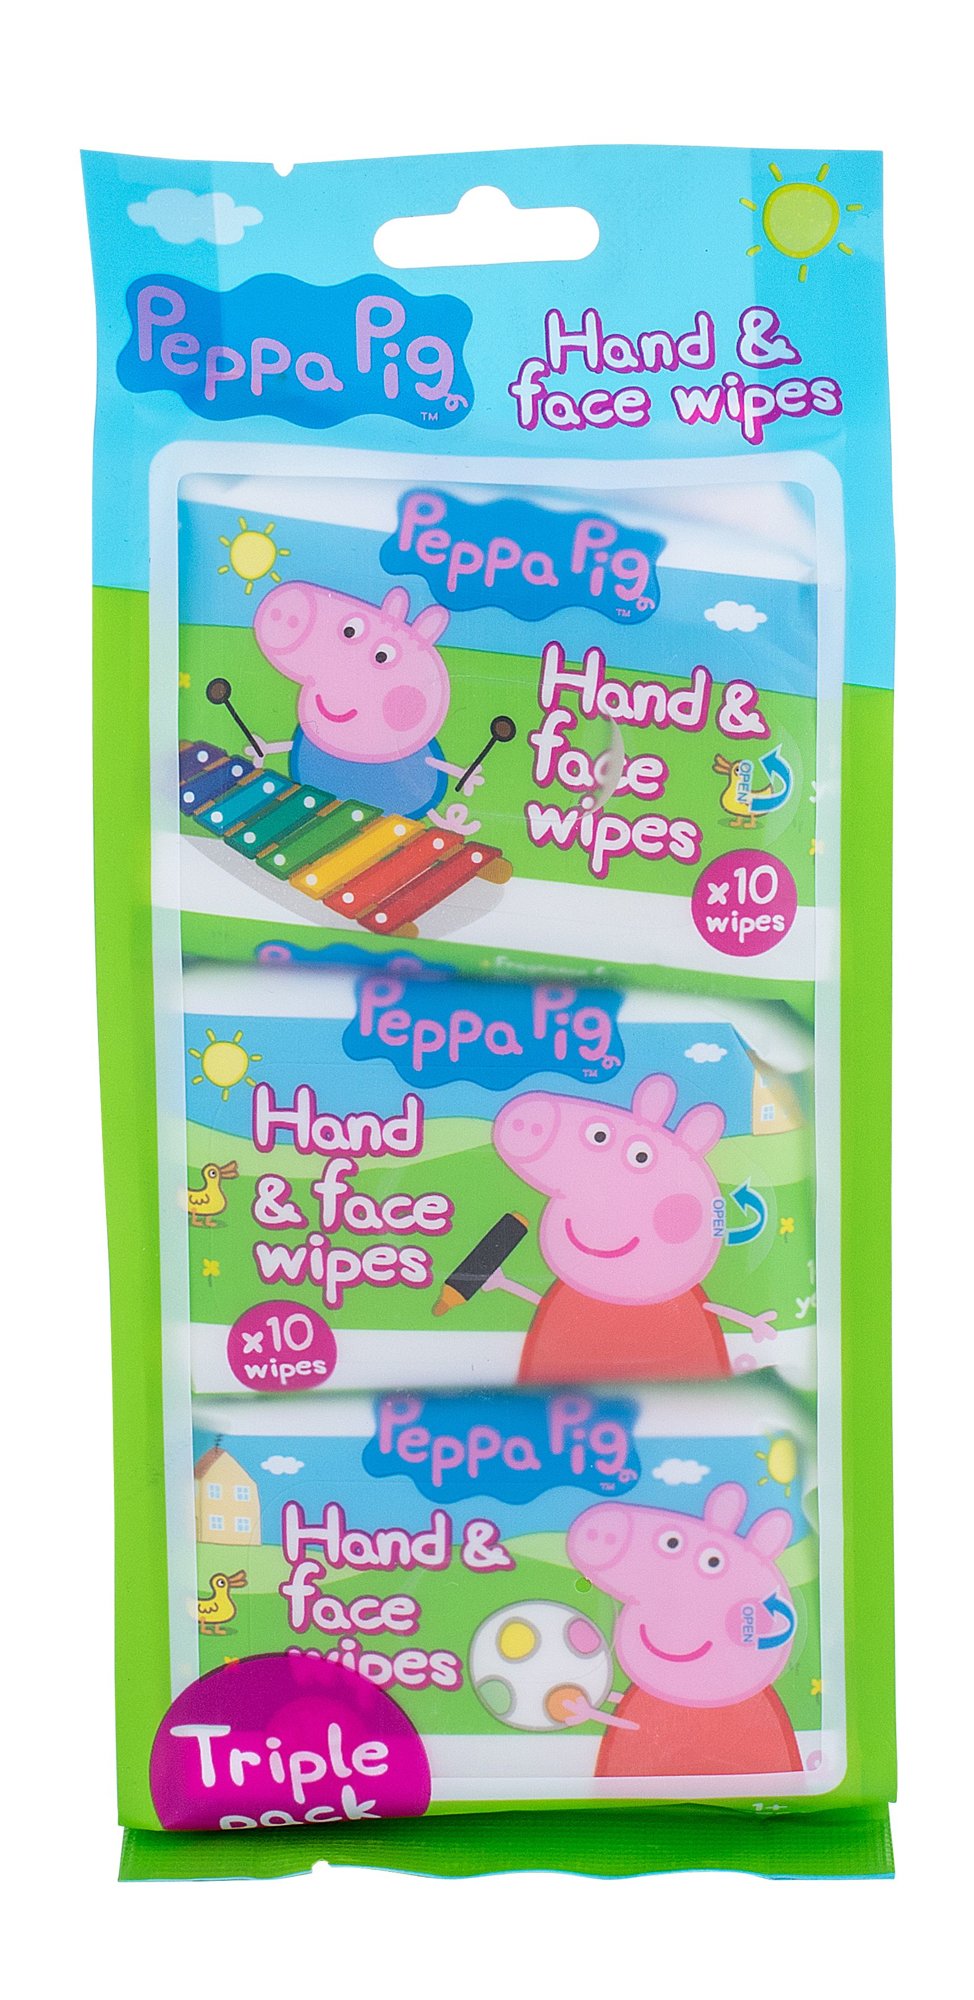 Peppa Pig Hand & Face Wipes